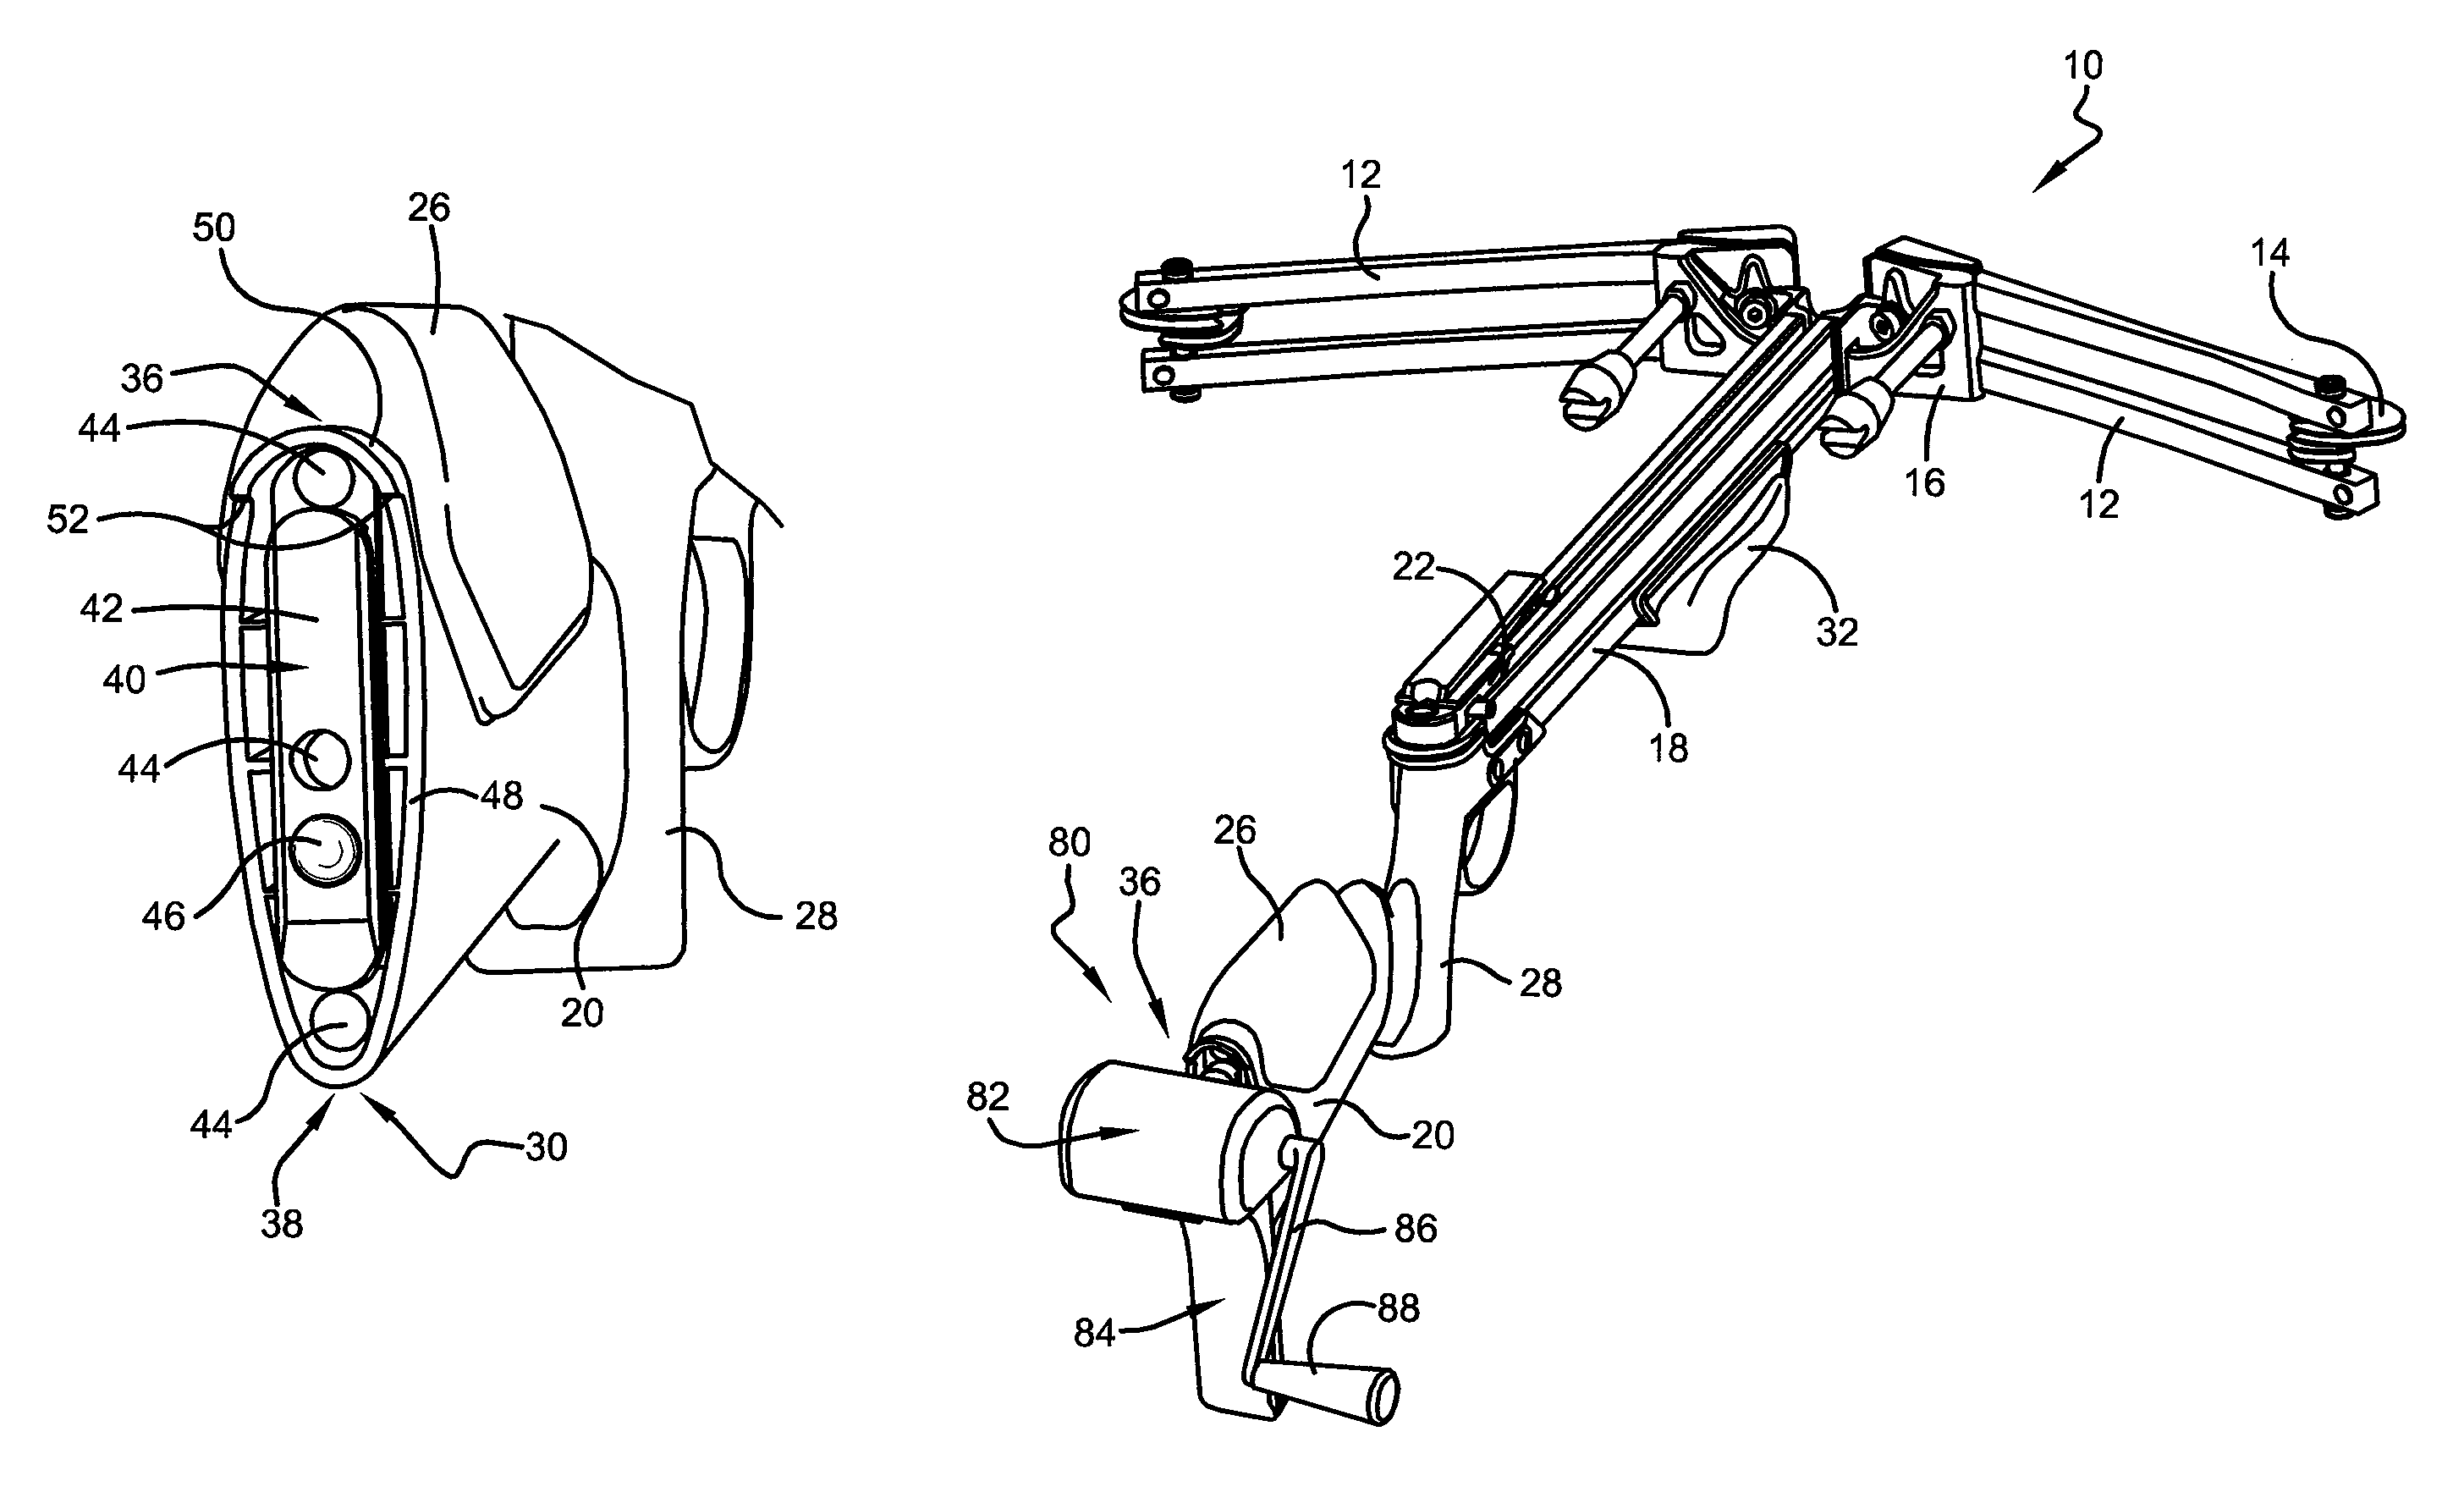 Crossbow and components attached by a sliding joint assembly